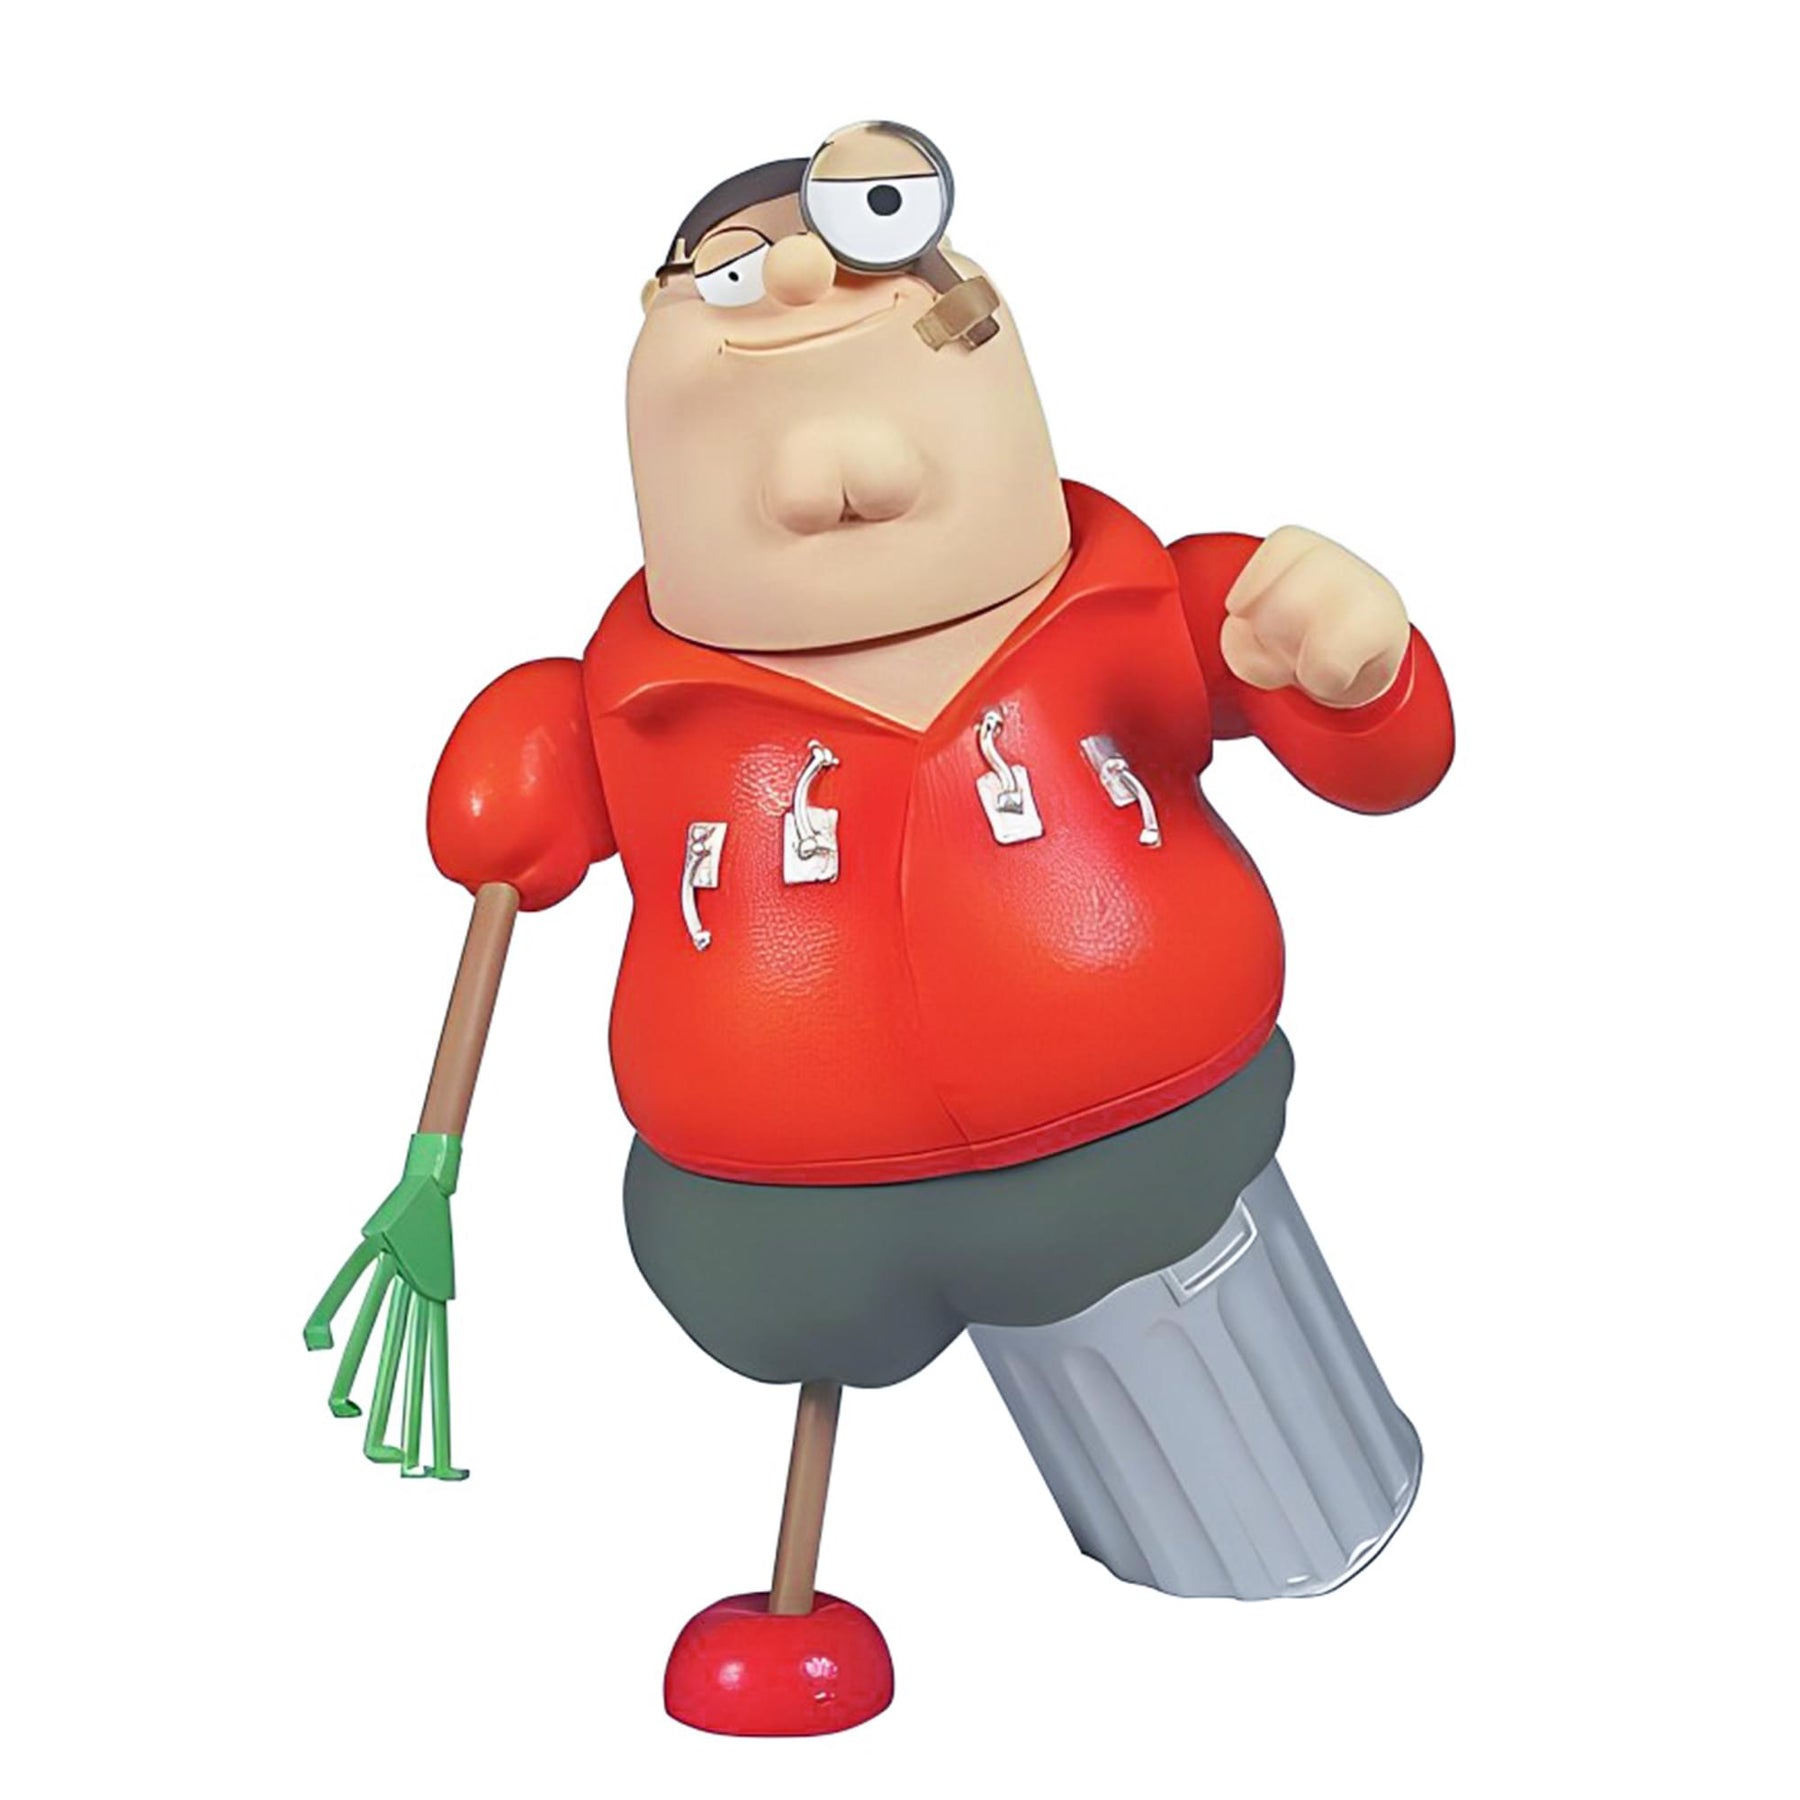 Family Guy Series 7 Action Figure | Bionic Peter